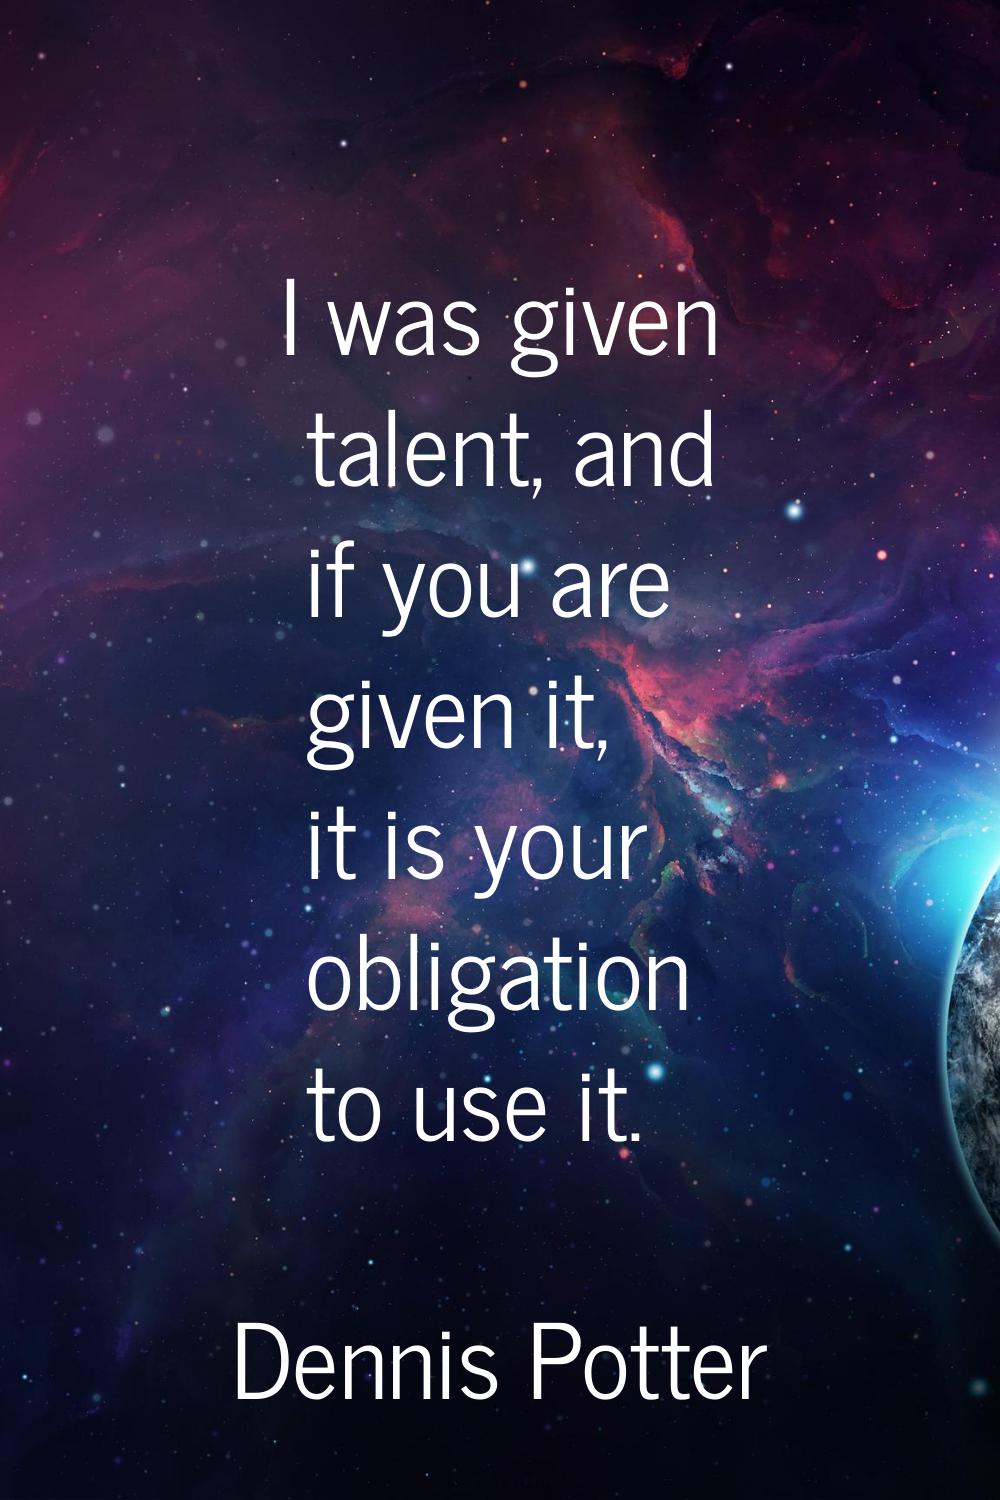 I was given talent, and if you are given it, it is your obligation to use it.